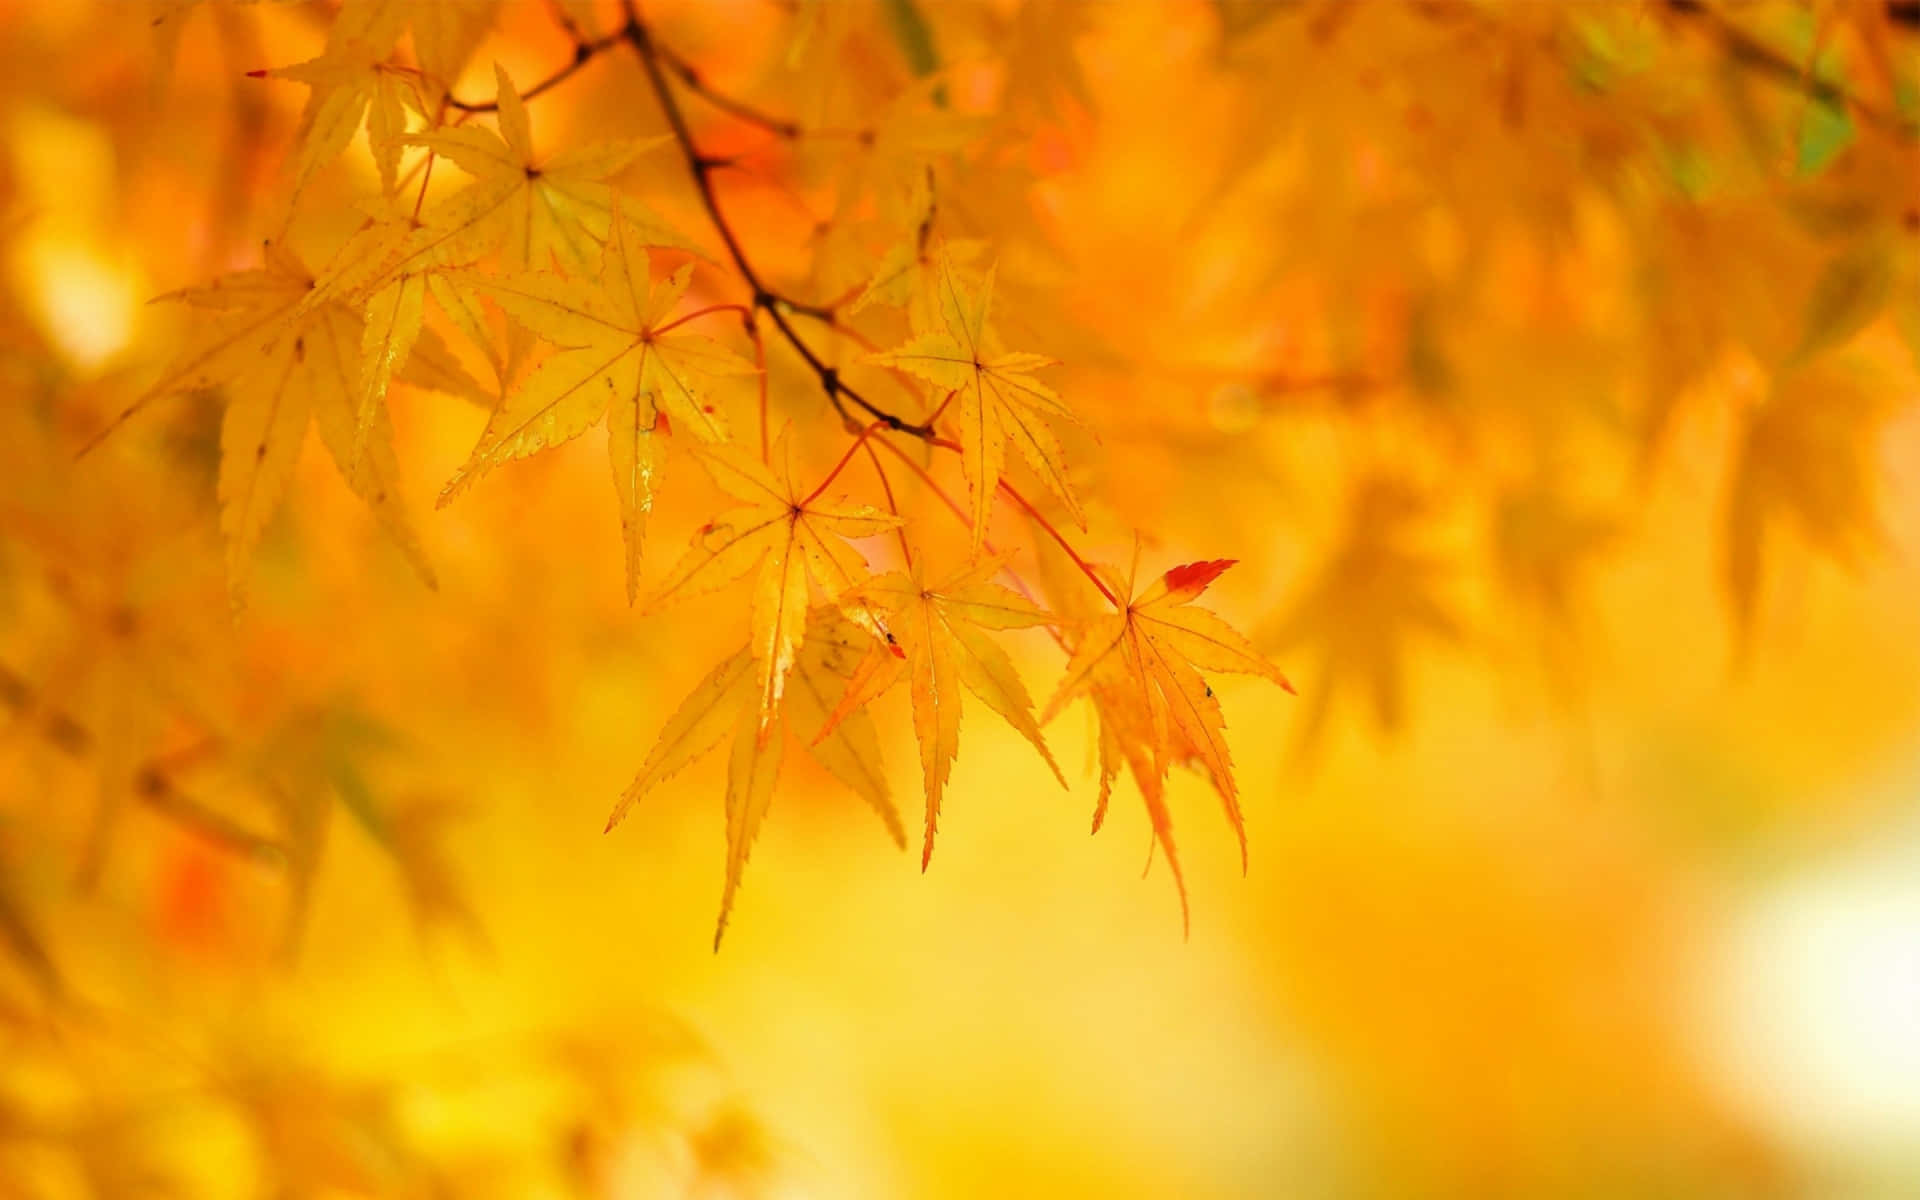 A beautiful scene of yellow leaves on trees during autumn Wallpaper